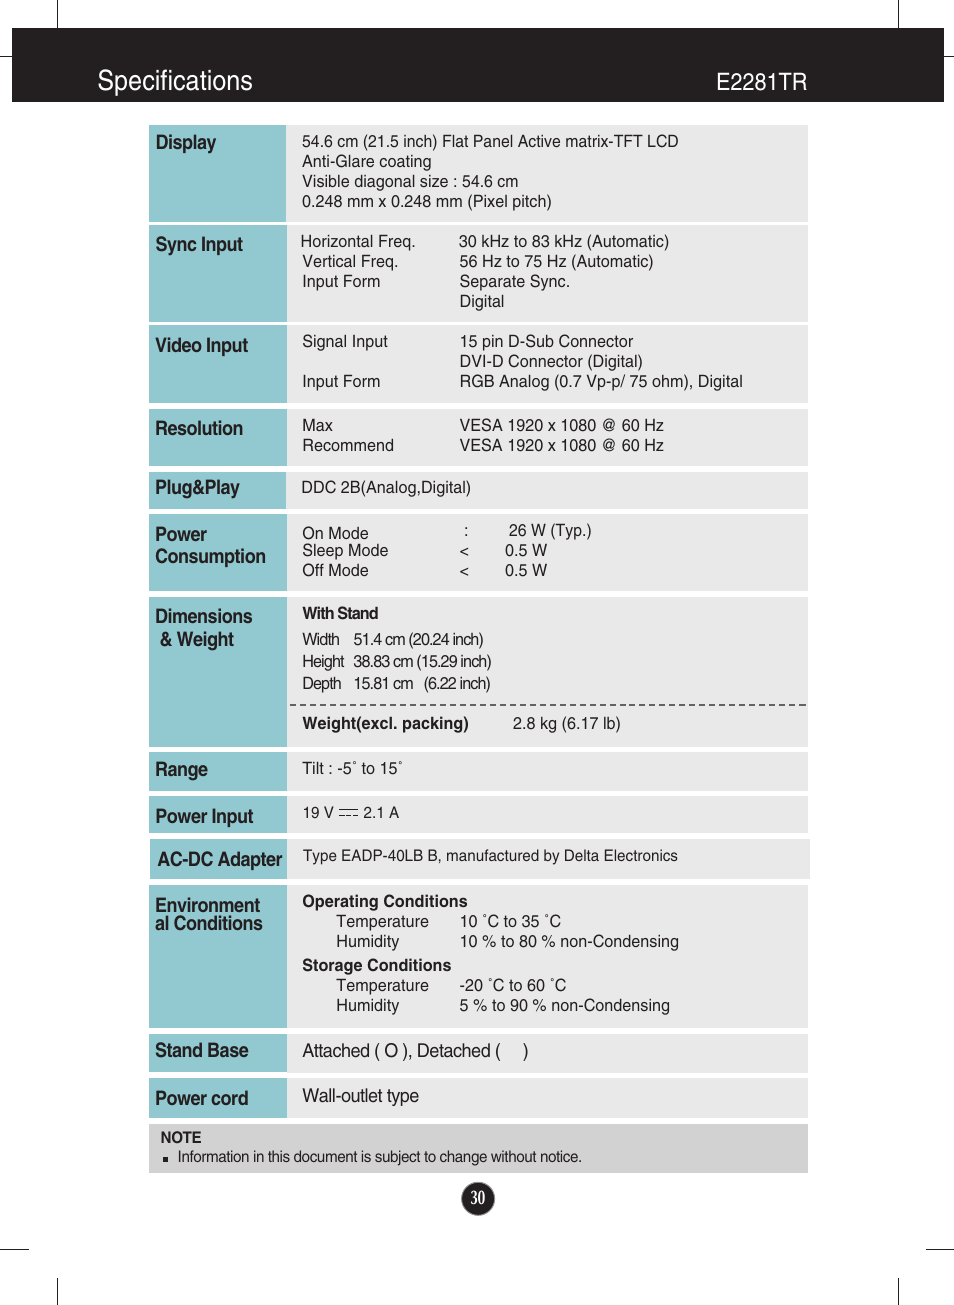 Specifications, E2281tr | LG E2281VR-BN User Manual | Page 31 / 35